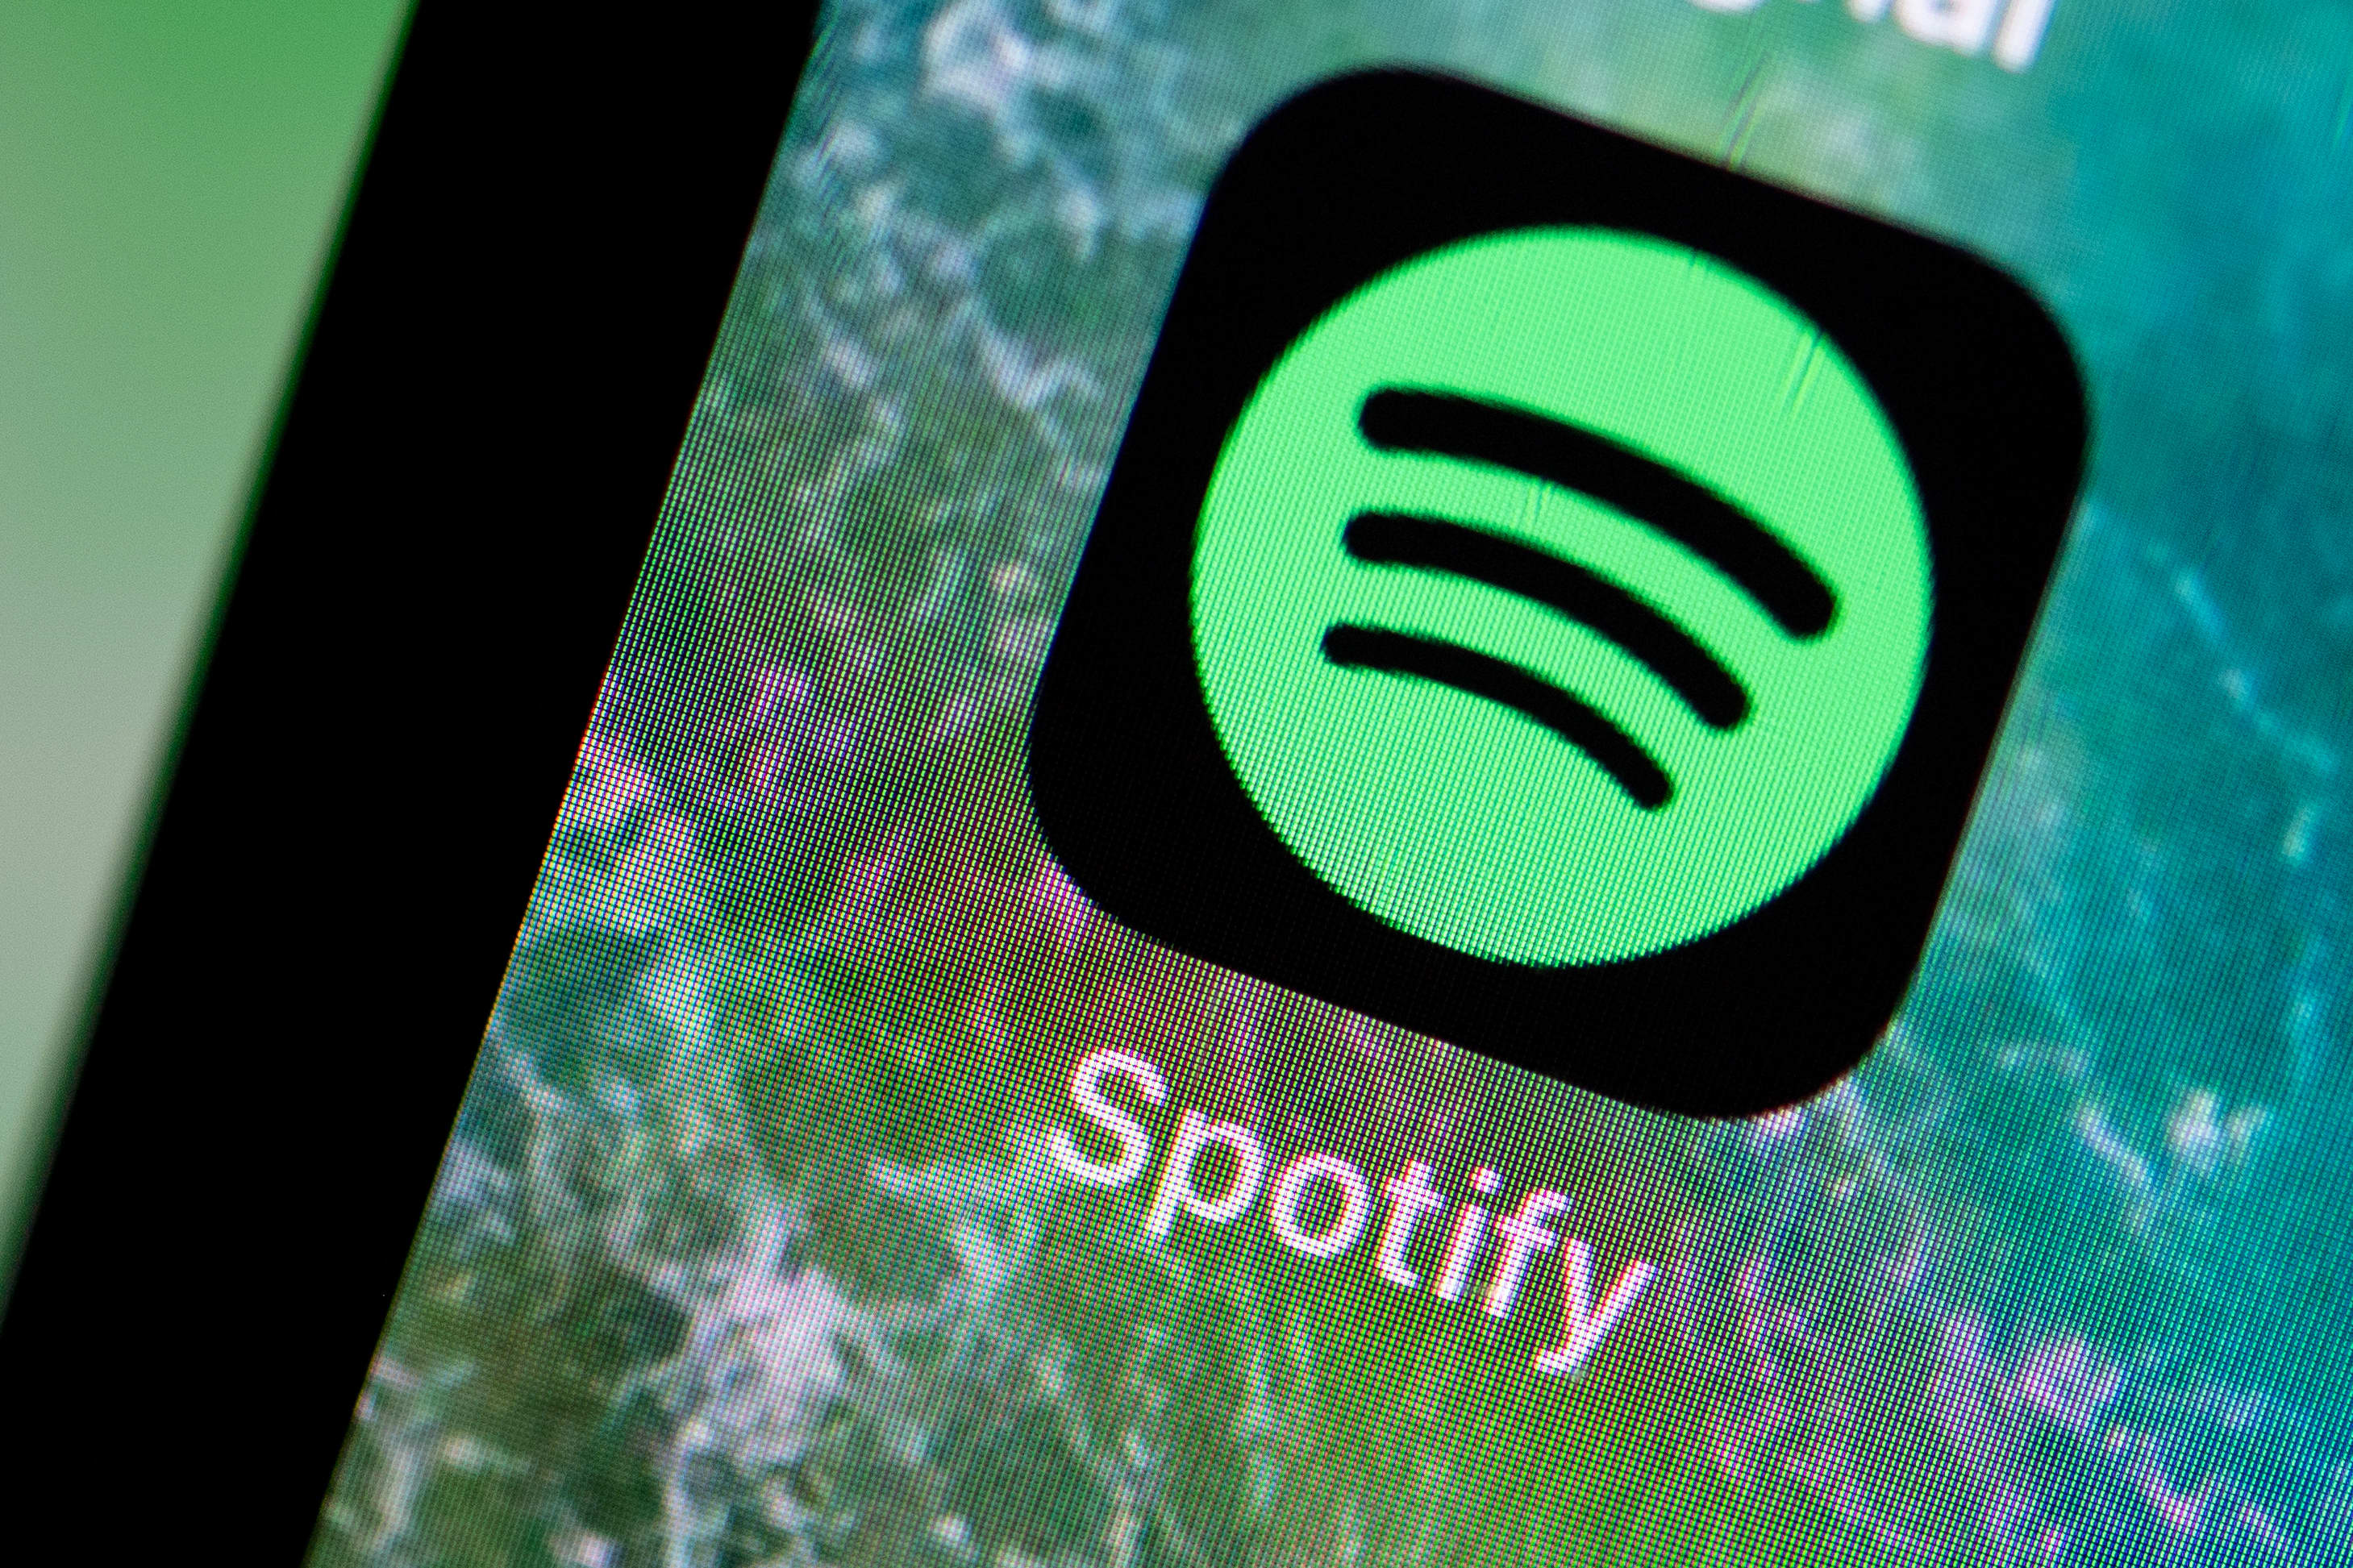 Spotify plans to launch in 80 other countries